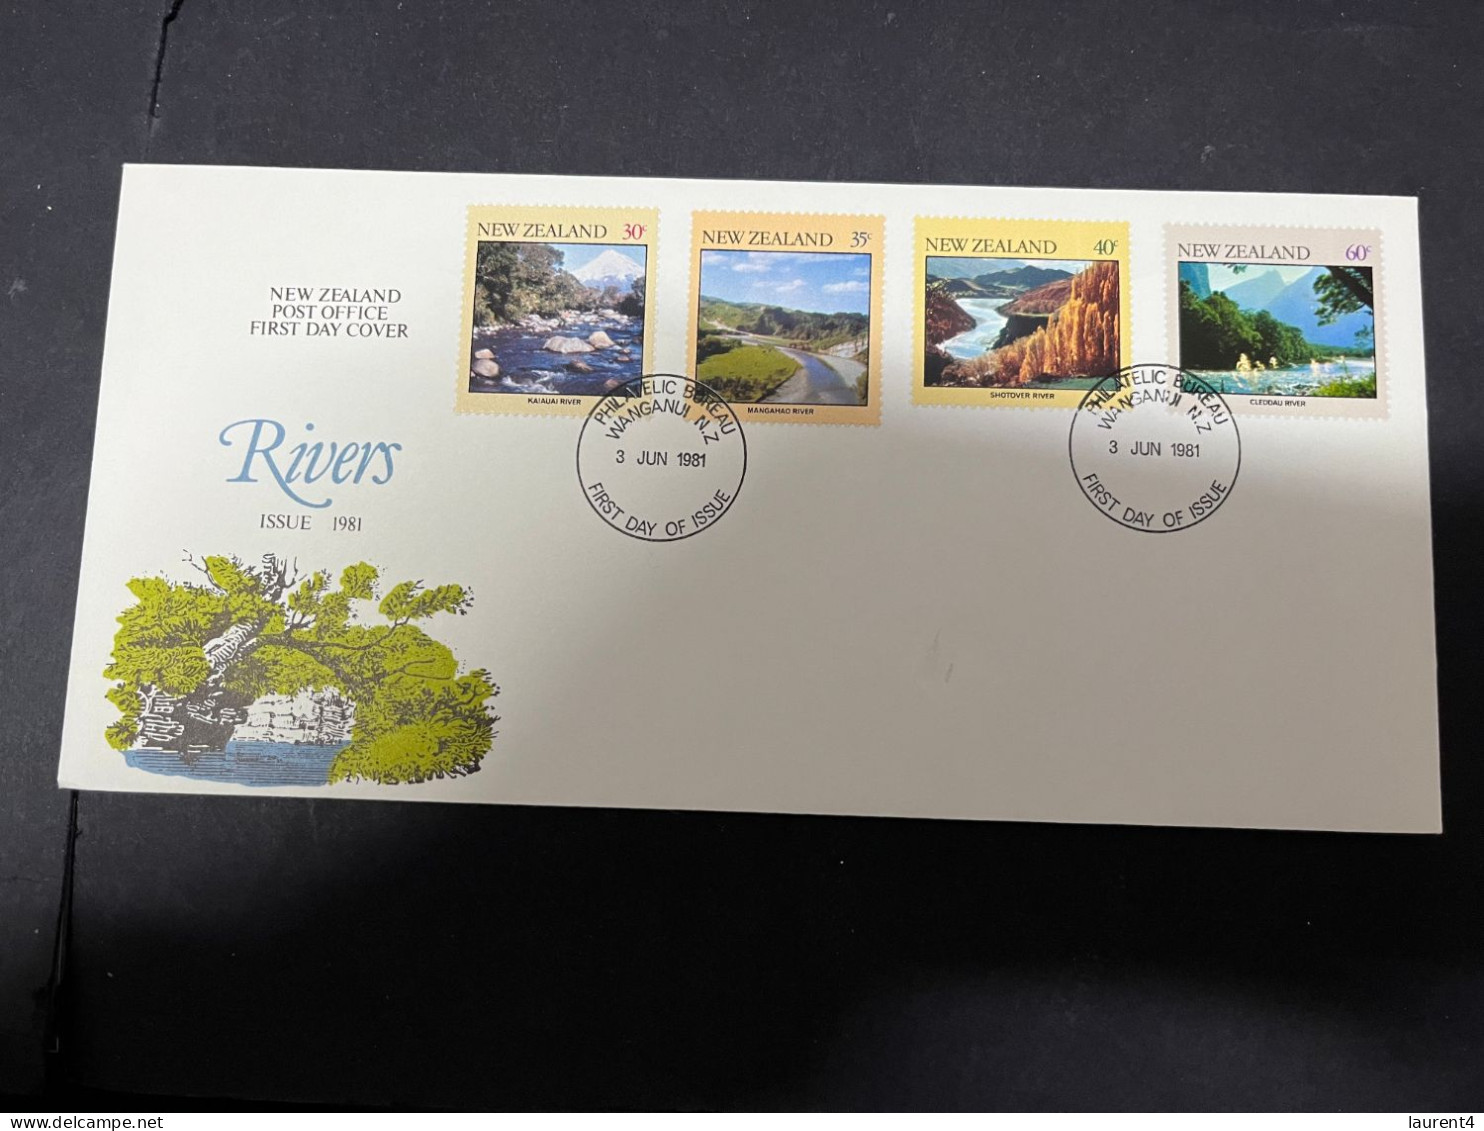 9-5-2024 (4 Z 34) New Zealand FDC - 1981 - Rivers - FDC